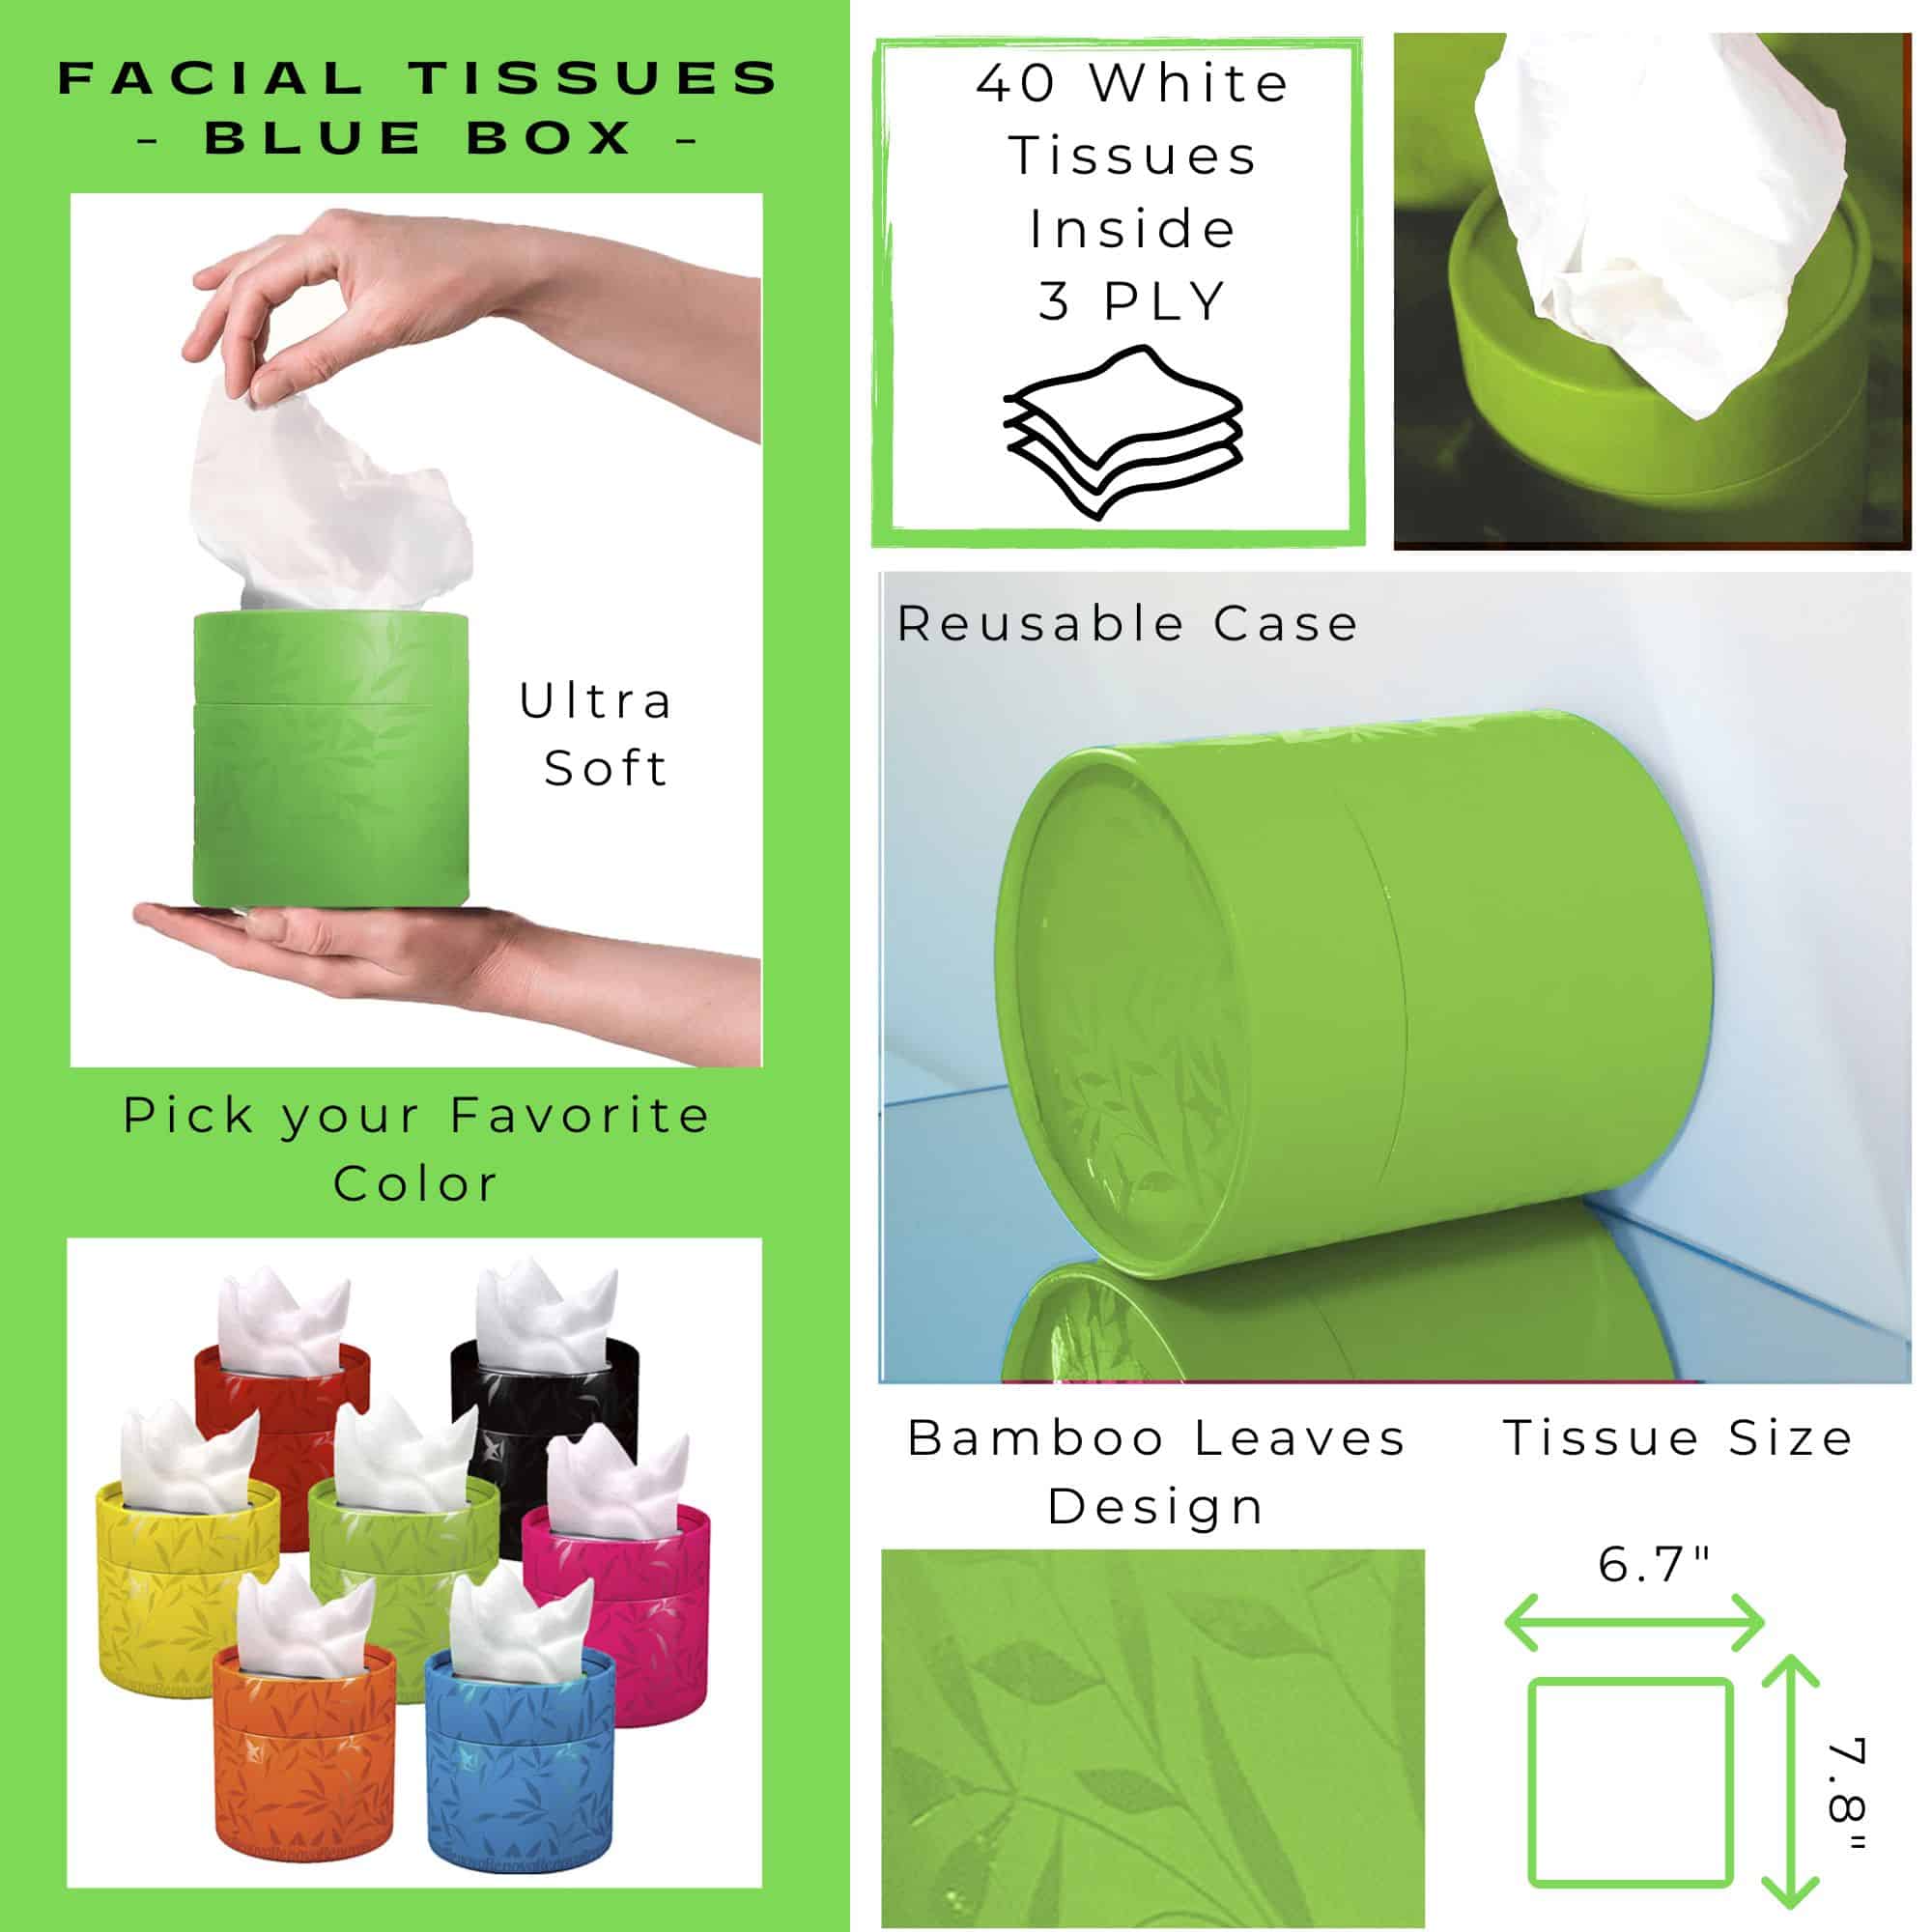 Premium Tissue Paper Products - Elevate Everyday Comfort and